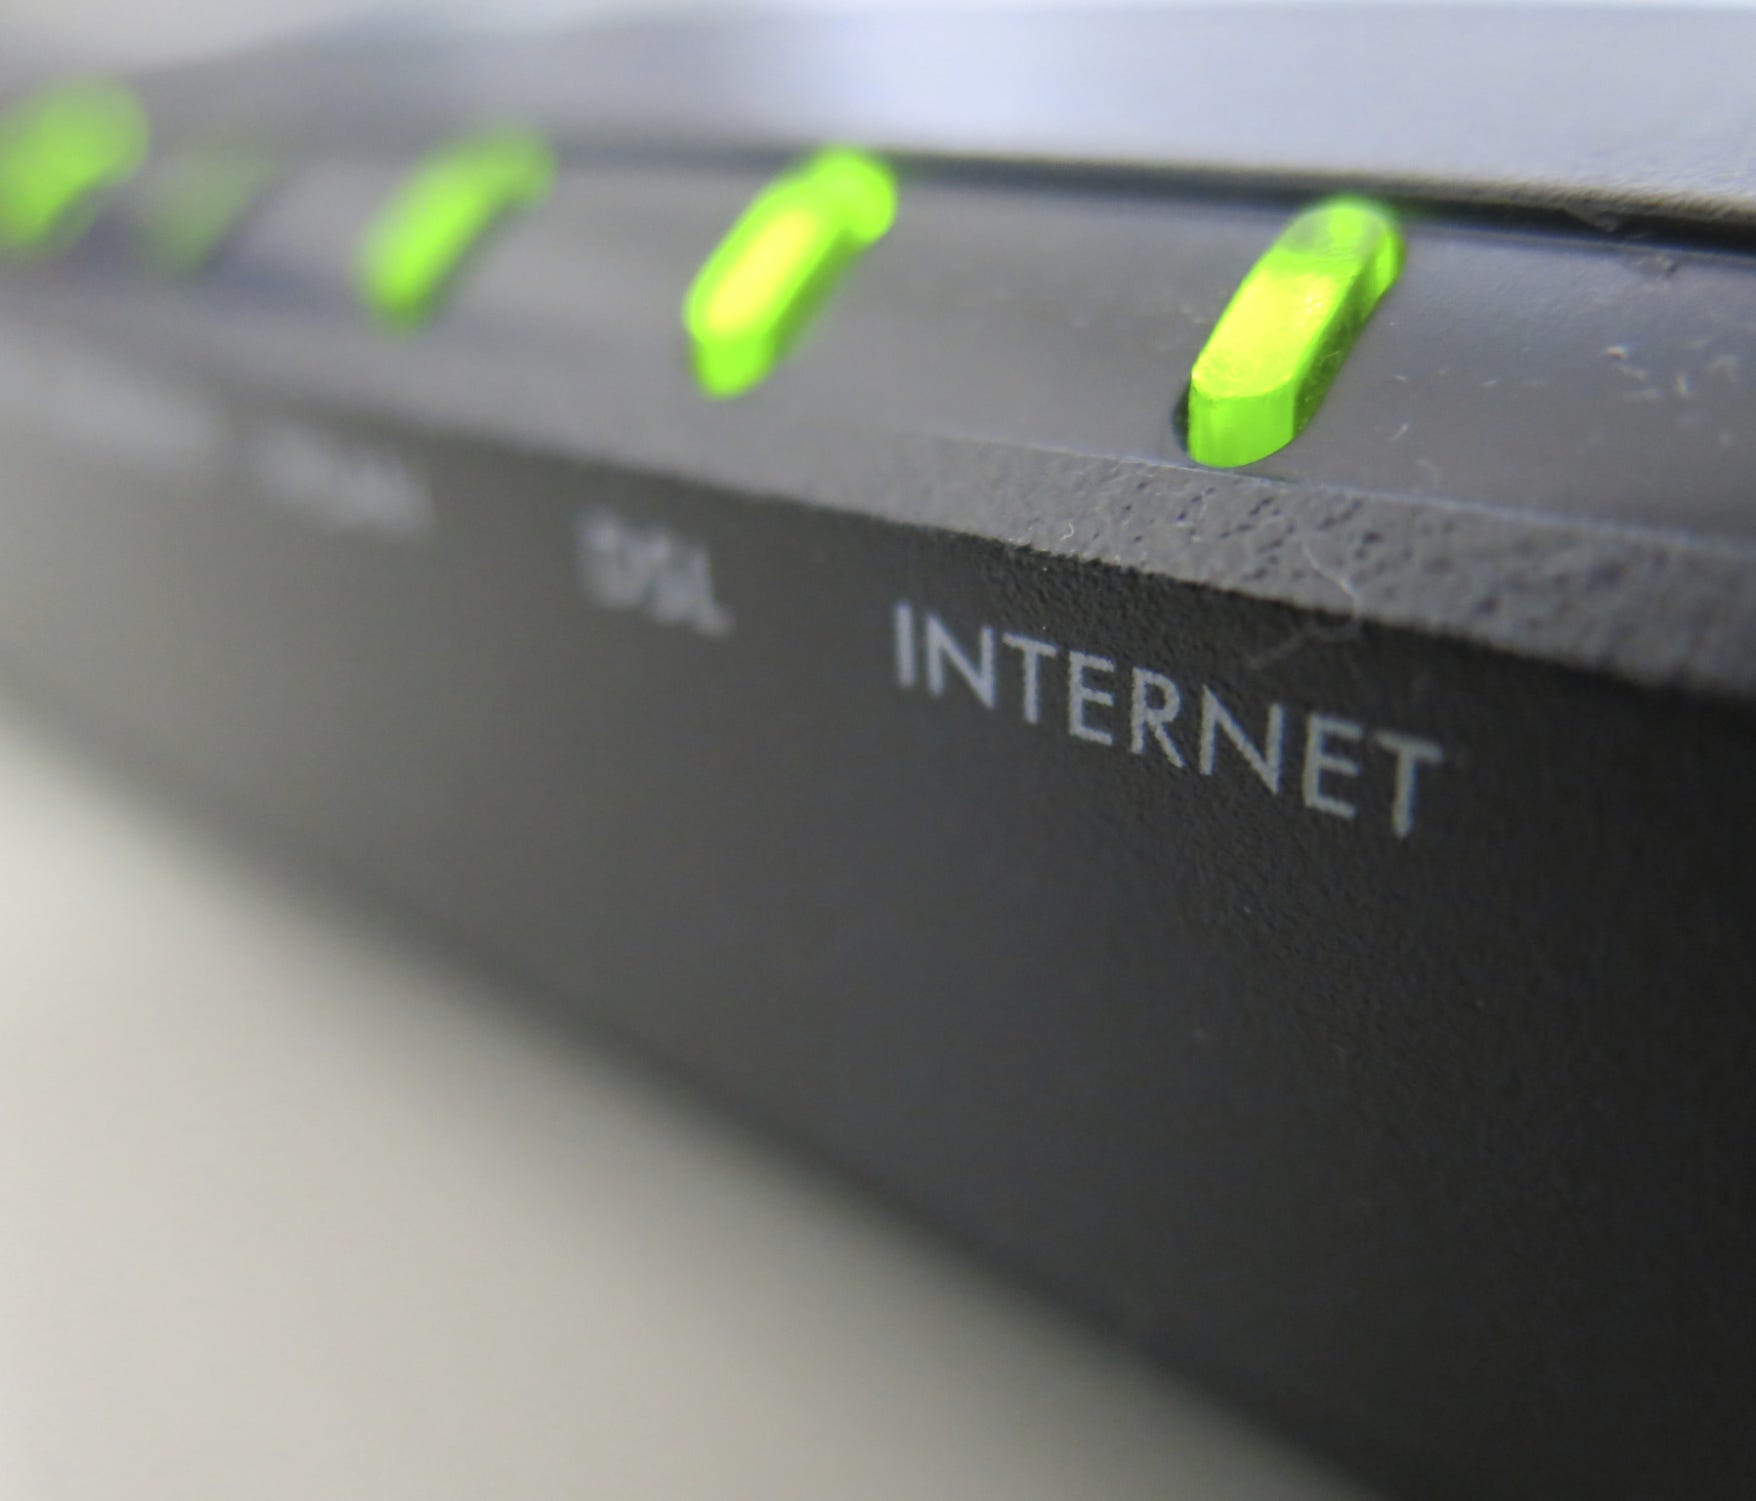 At-home Wi-Fi signal bad? It might be time to upgrade your router.